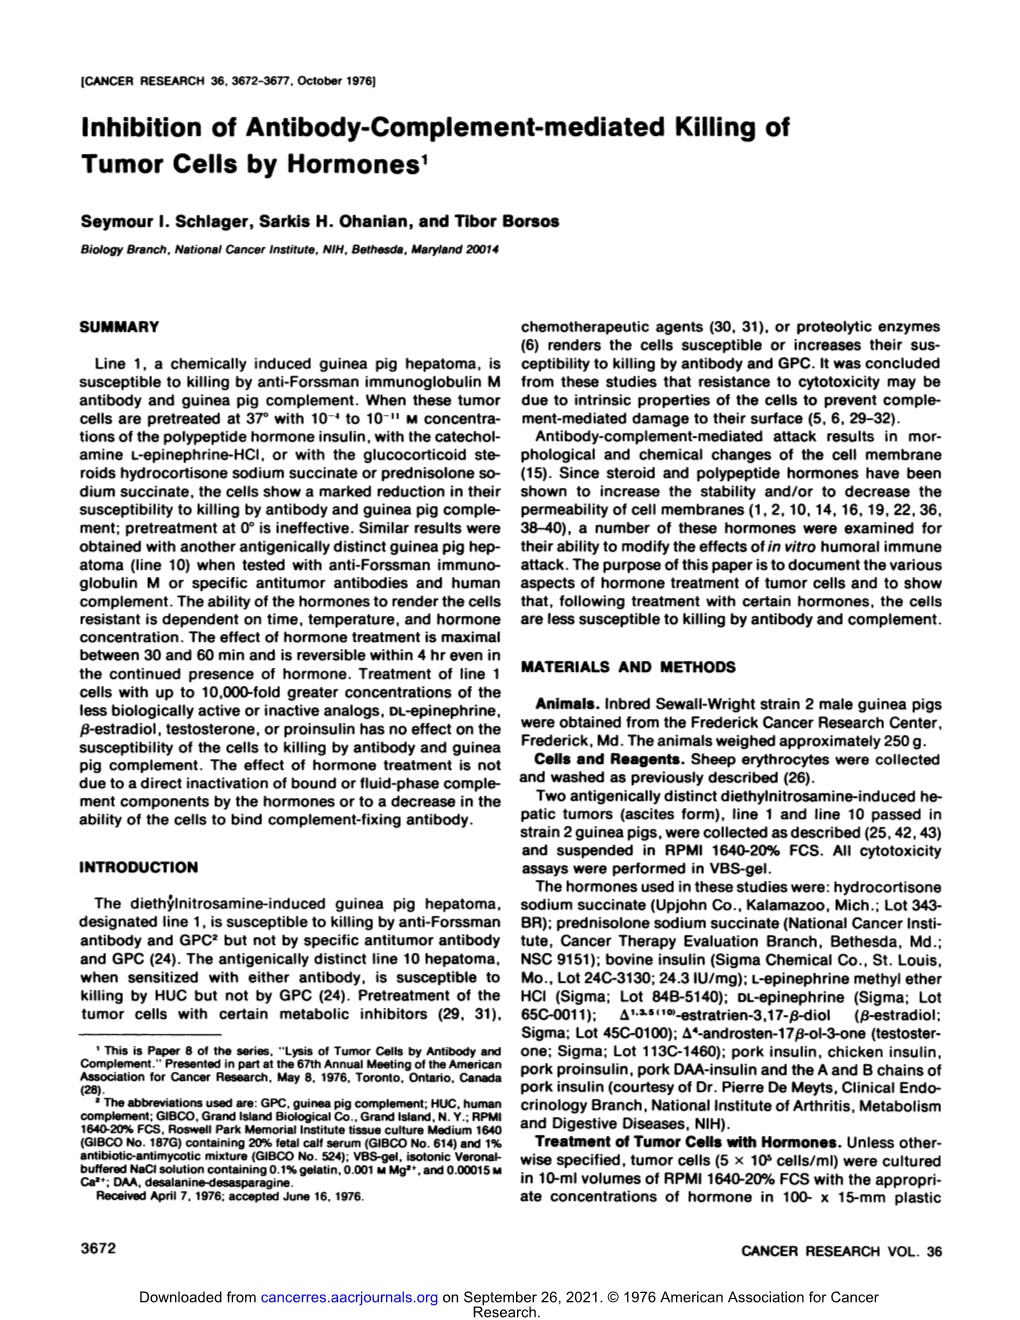 Inhibition of Antibody-Complement-Mediated Killing of Tumor Cells by Hormones1